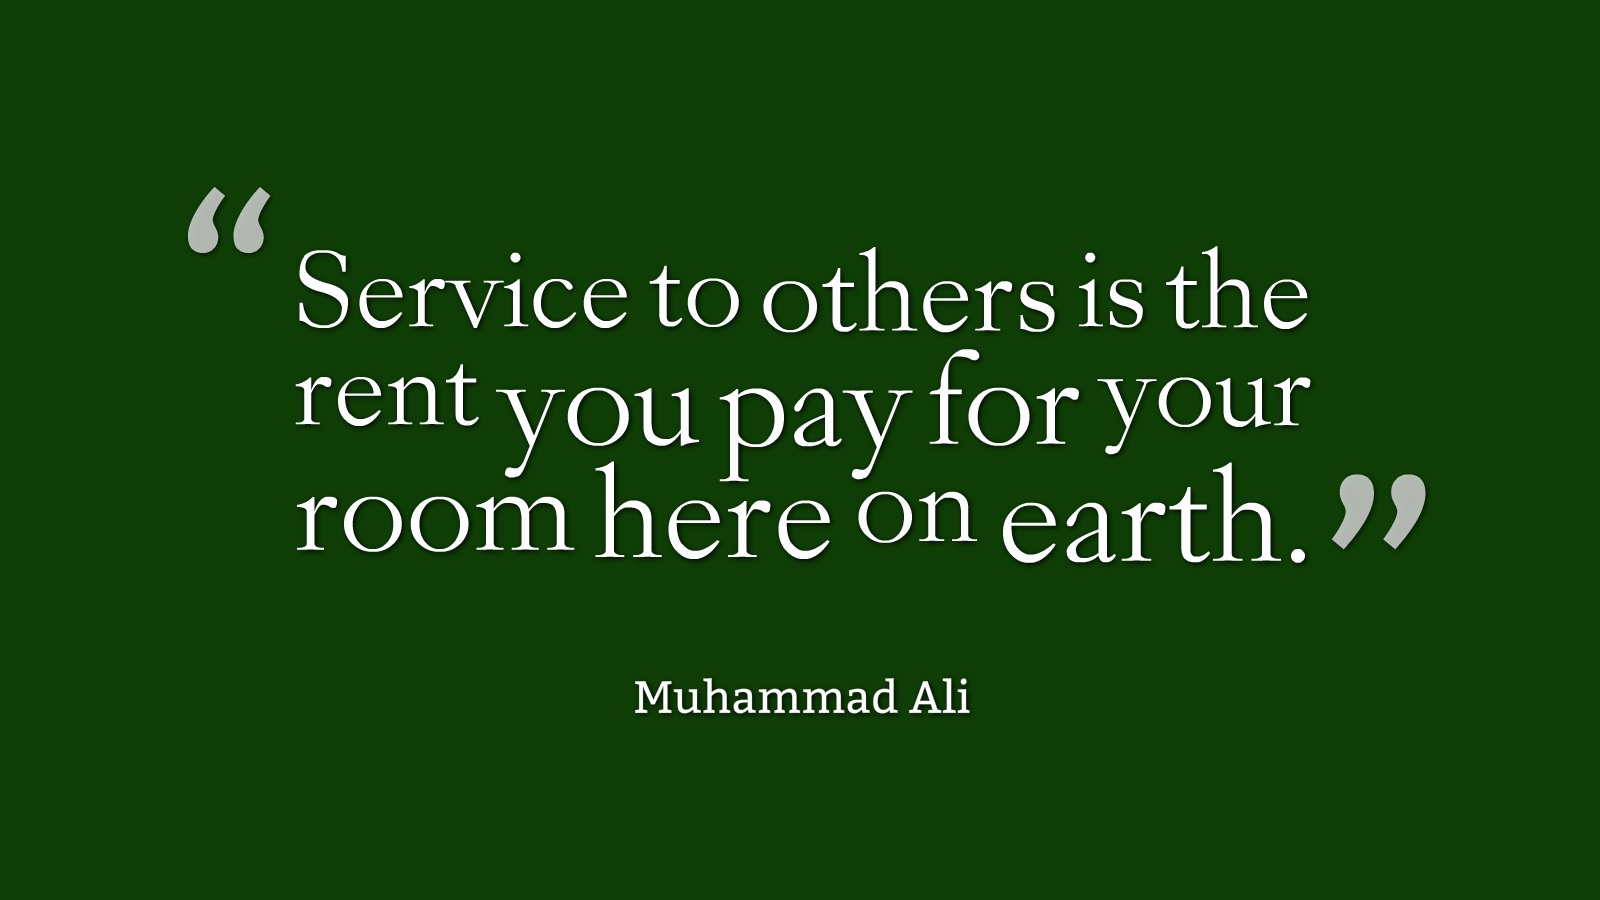 Service to others is the rent you pay for your room here on earth. Muhammad Ali